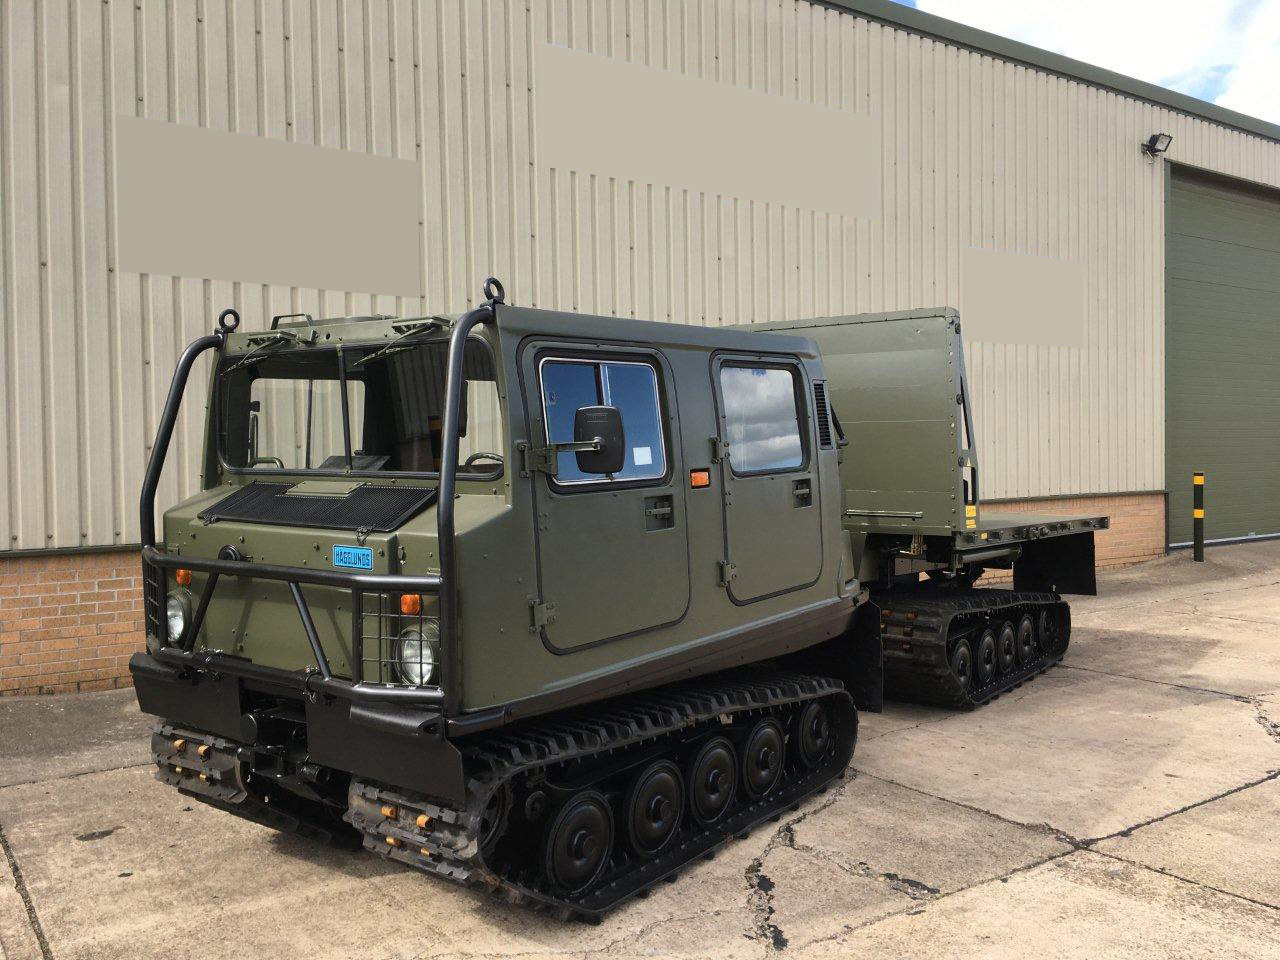 MoD Surplus, ex army military vehicles for sale - Hagglunds Bv206 Load Carrier with Crane